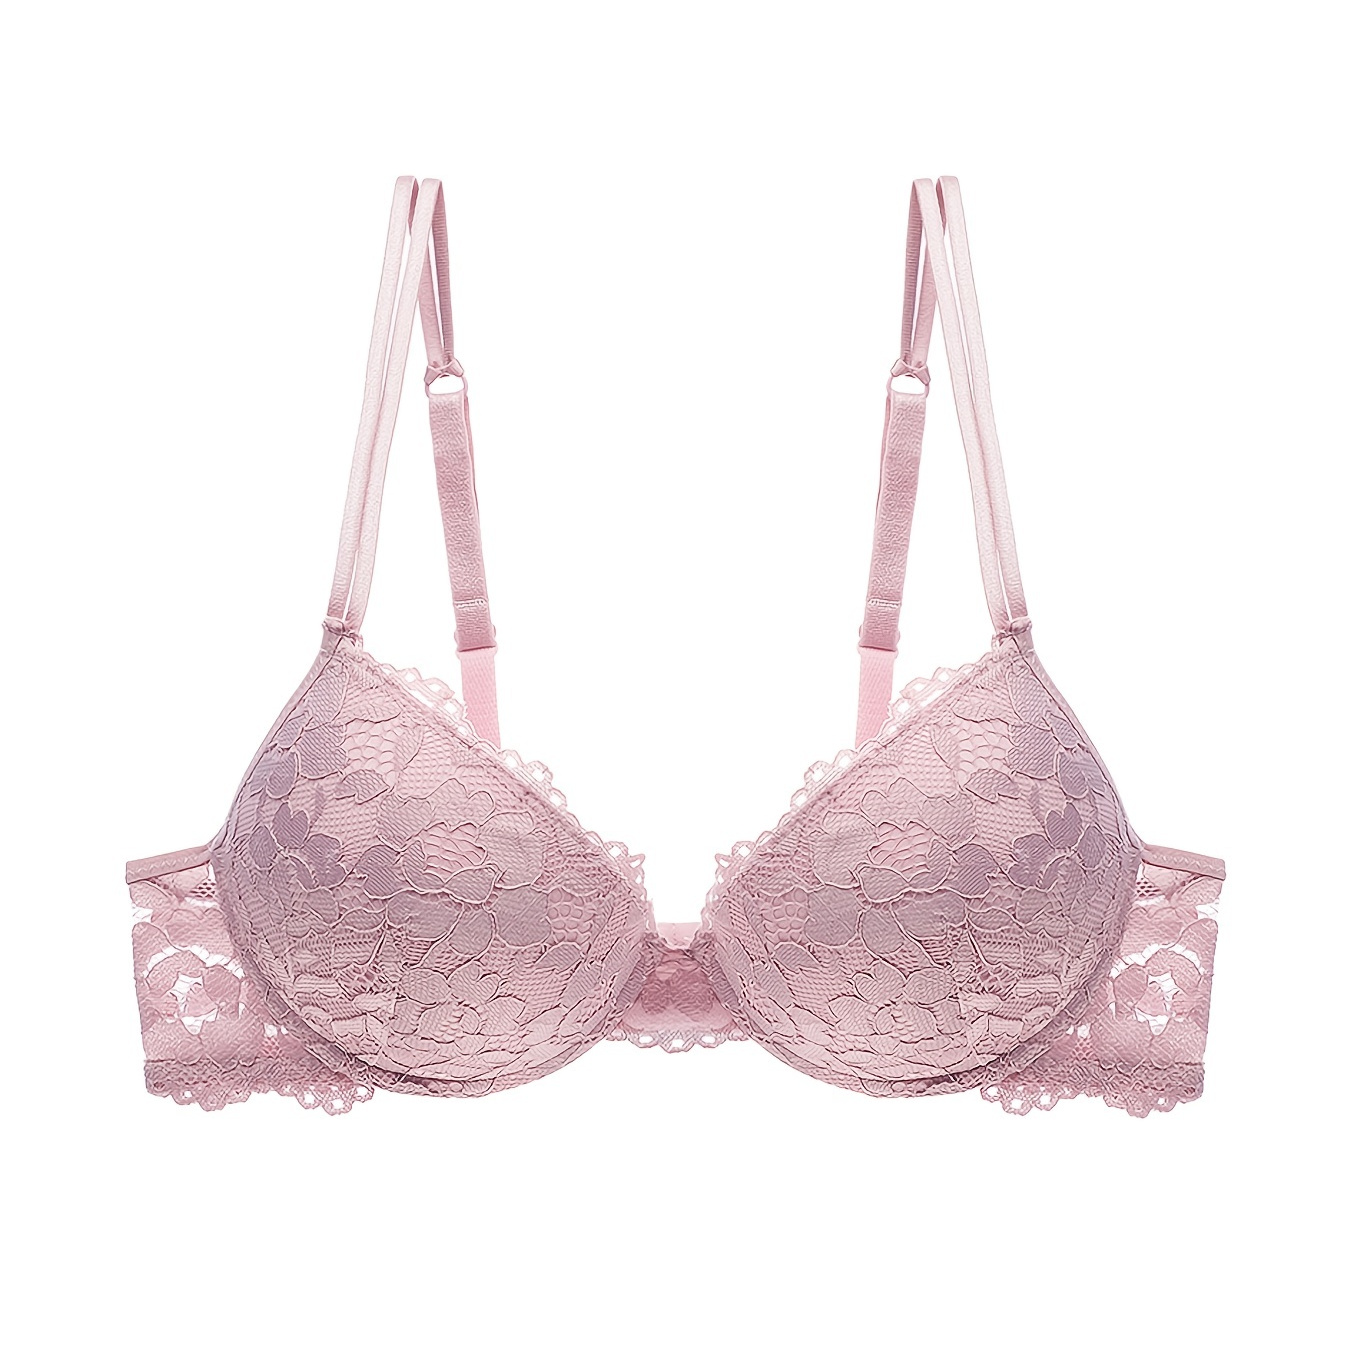 Push-up bra with Lace Back - Powder pink - Ladies